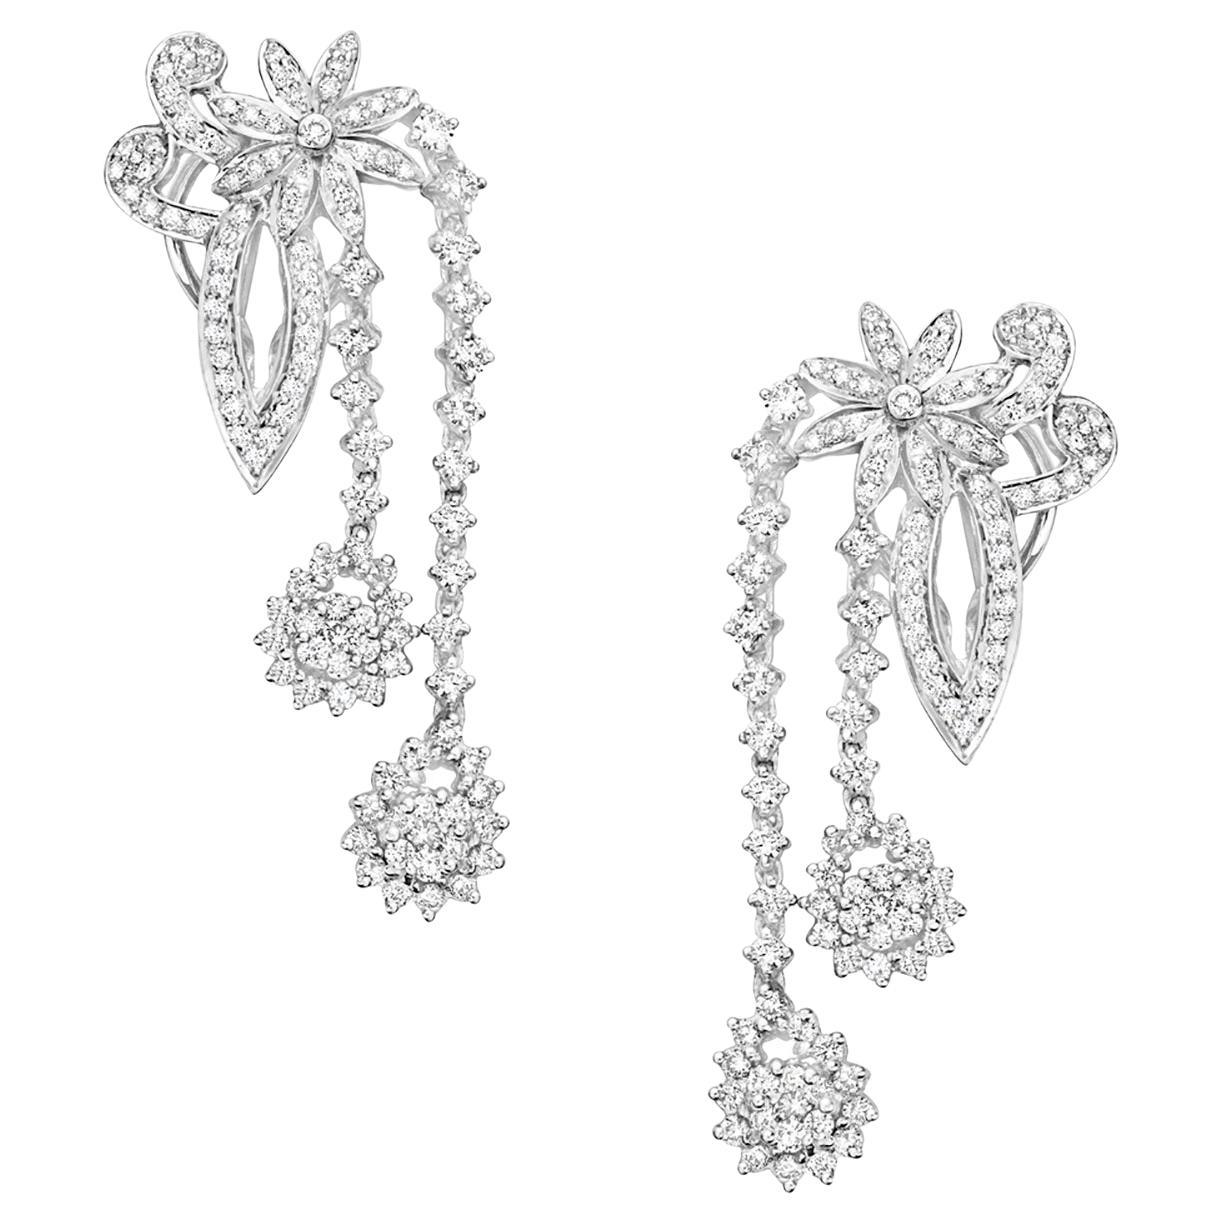 Floral Shaped Earrings with VS Diamonds Made in 18k White Gold For Sale